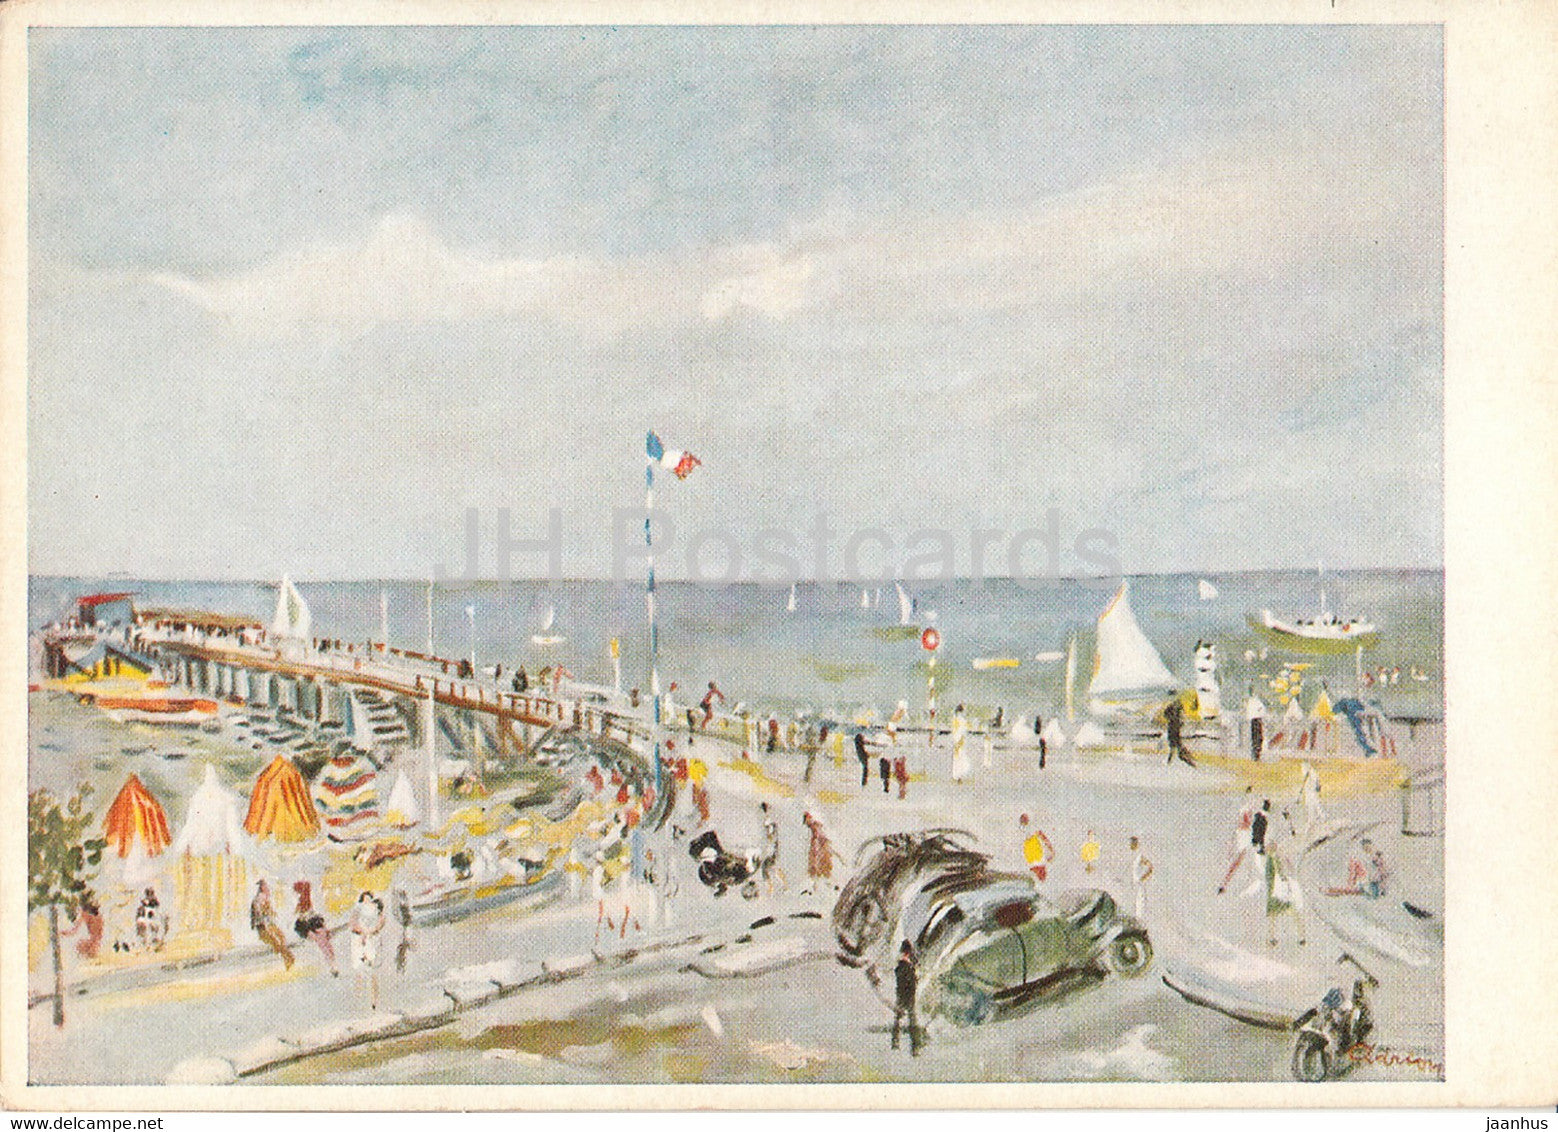 painting by Lucien Adrien - Strand bei Arcachon - Shore at Arcachon - French art - Germany - unused - JH Postcards